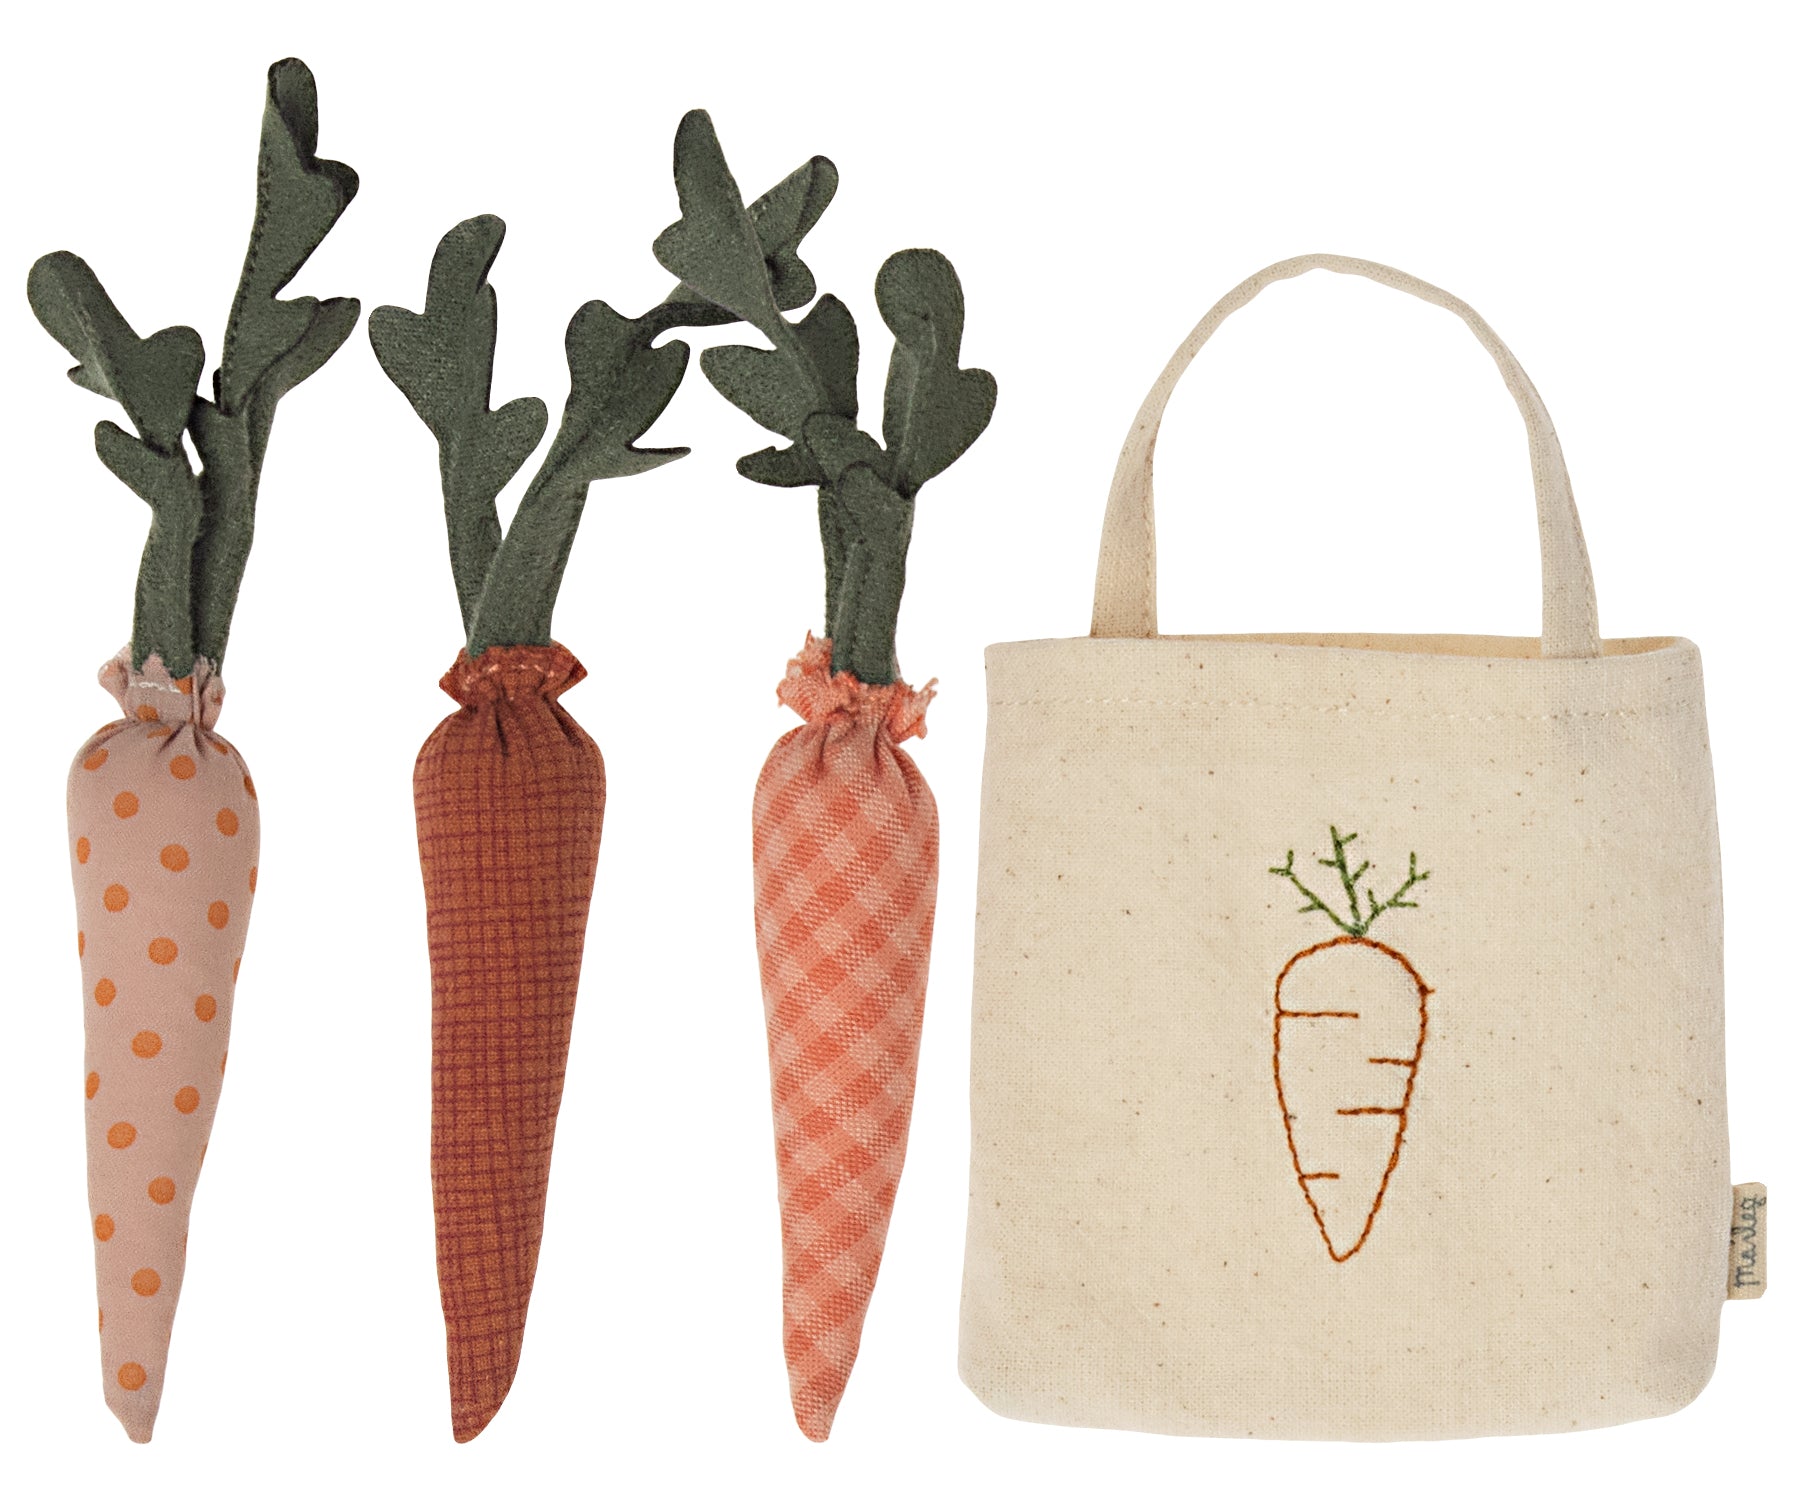 I finally got my carrot and completed my Grocery Bag motif 😆 :  r/Louisvuitton